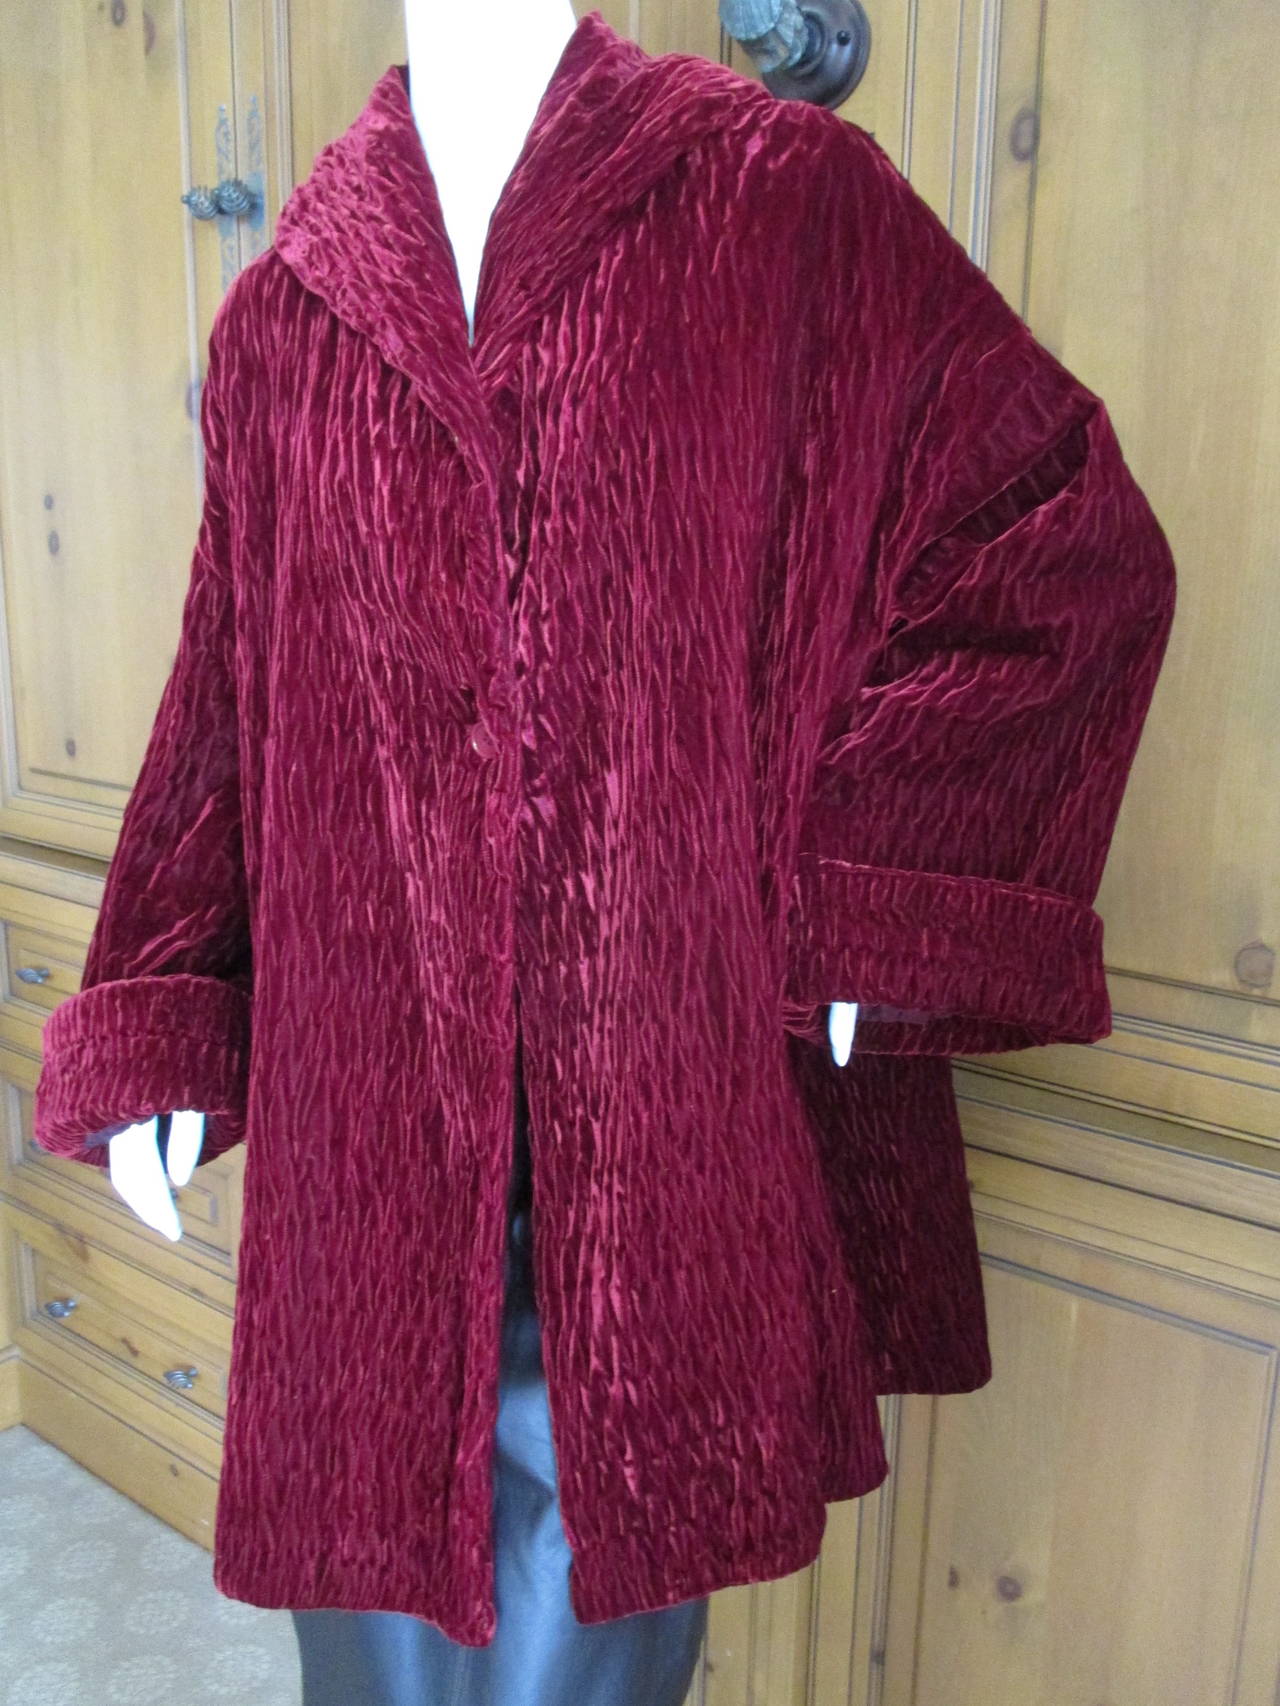 Romeo Gigli Burgundy Vintage Velvet Coat
Luscious Burgundy velvet with an unusual puckered treatment, so pretty.
Sz 42
This is cut extremely generously, the bust is 60